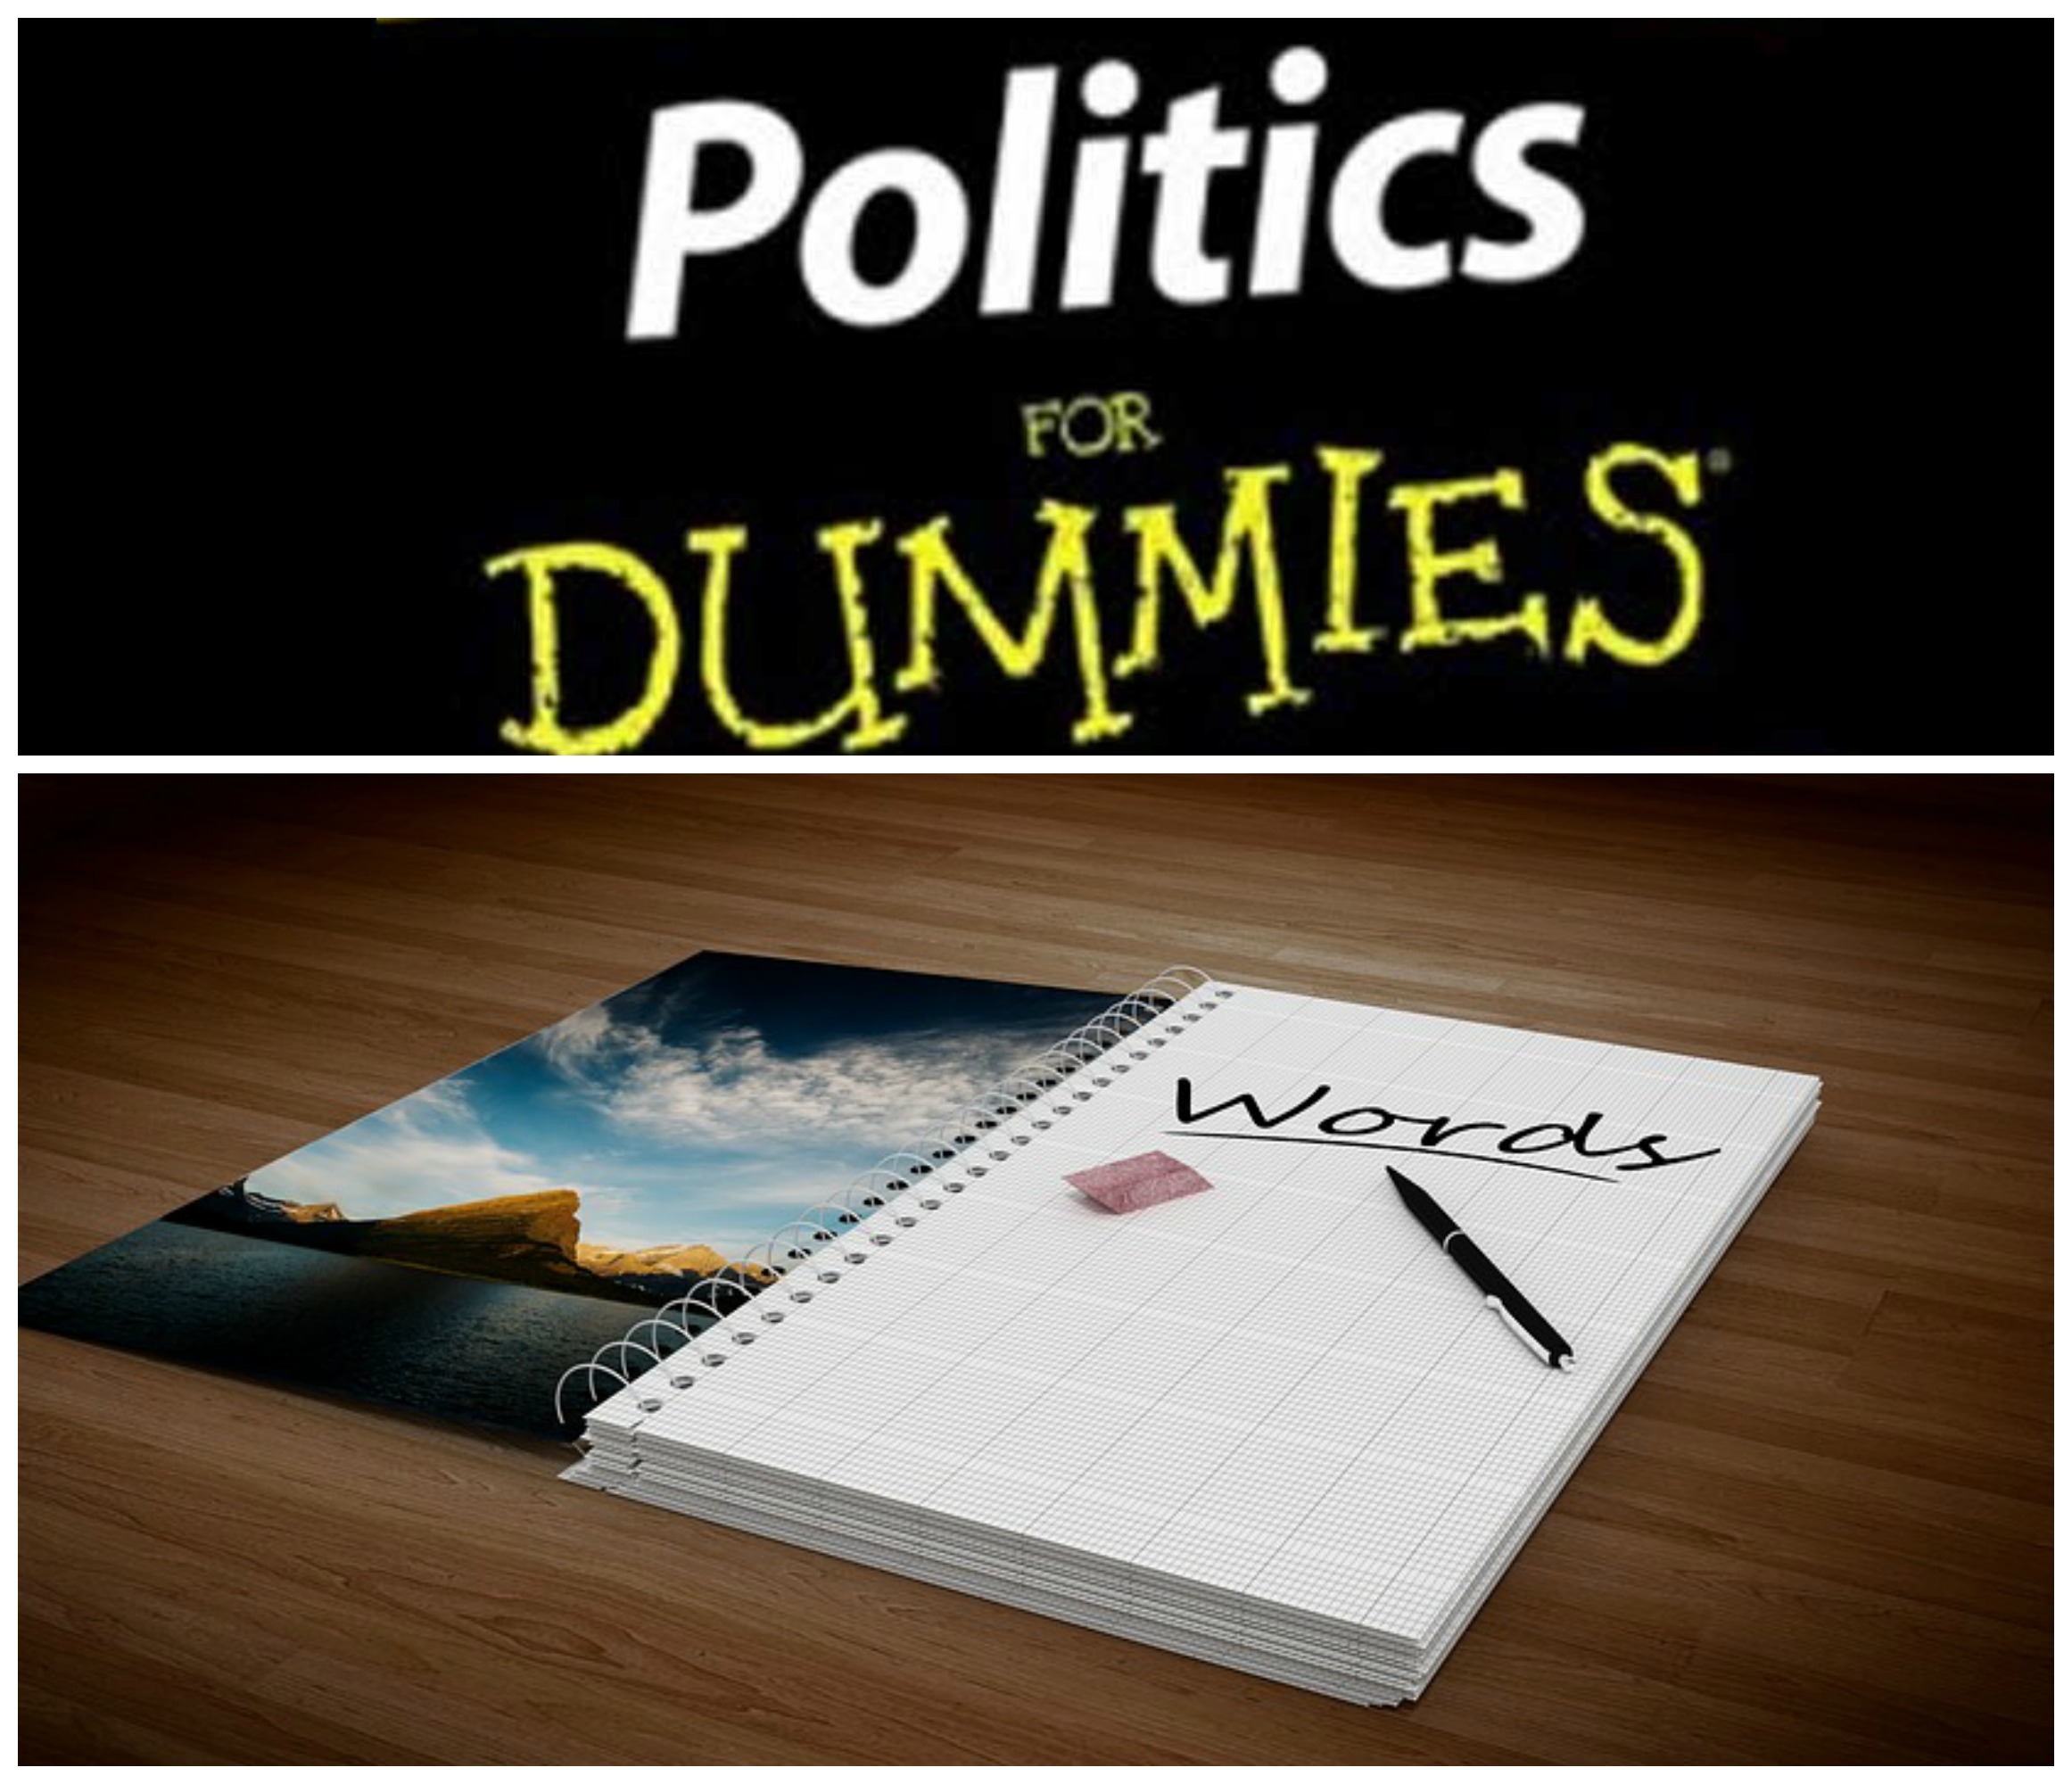 Politics for Dummies: Top 75 Political Terms You Should Know